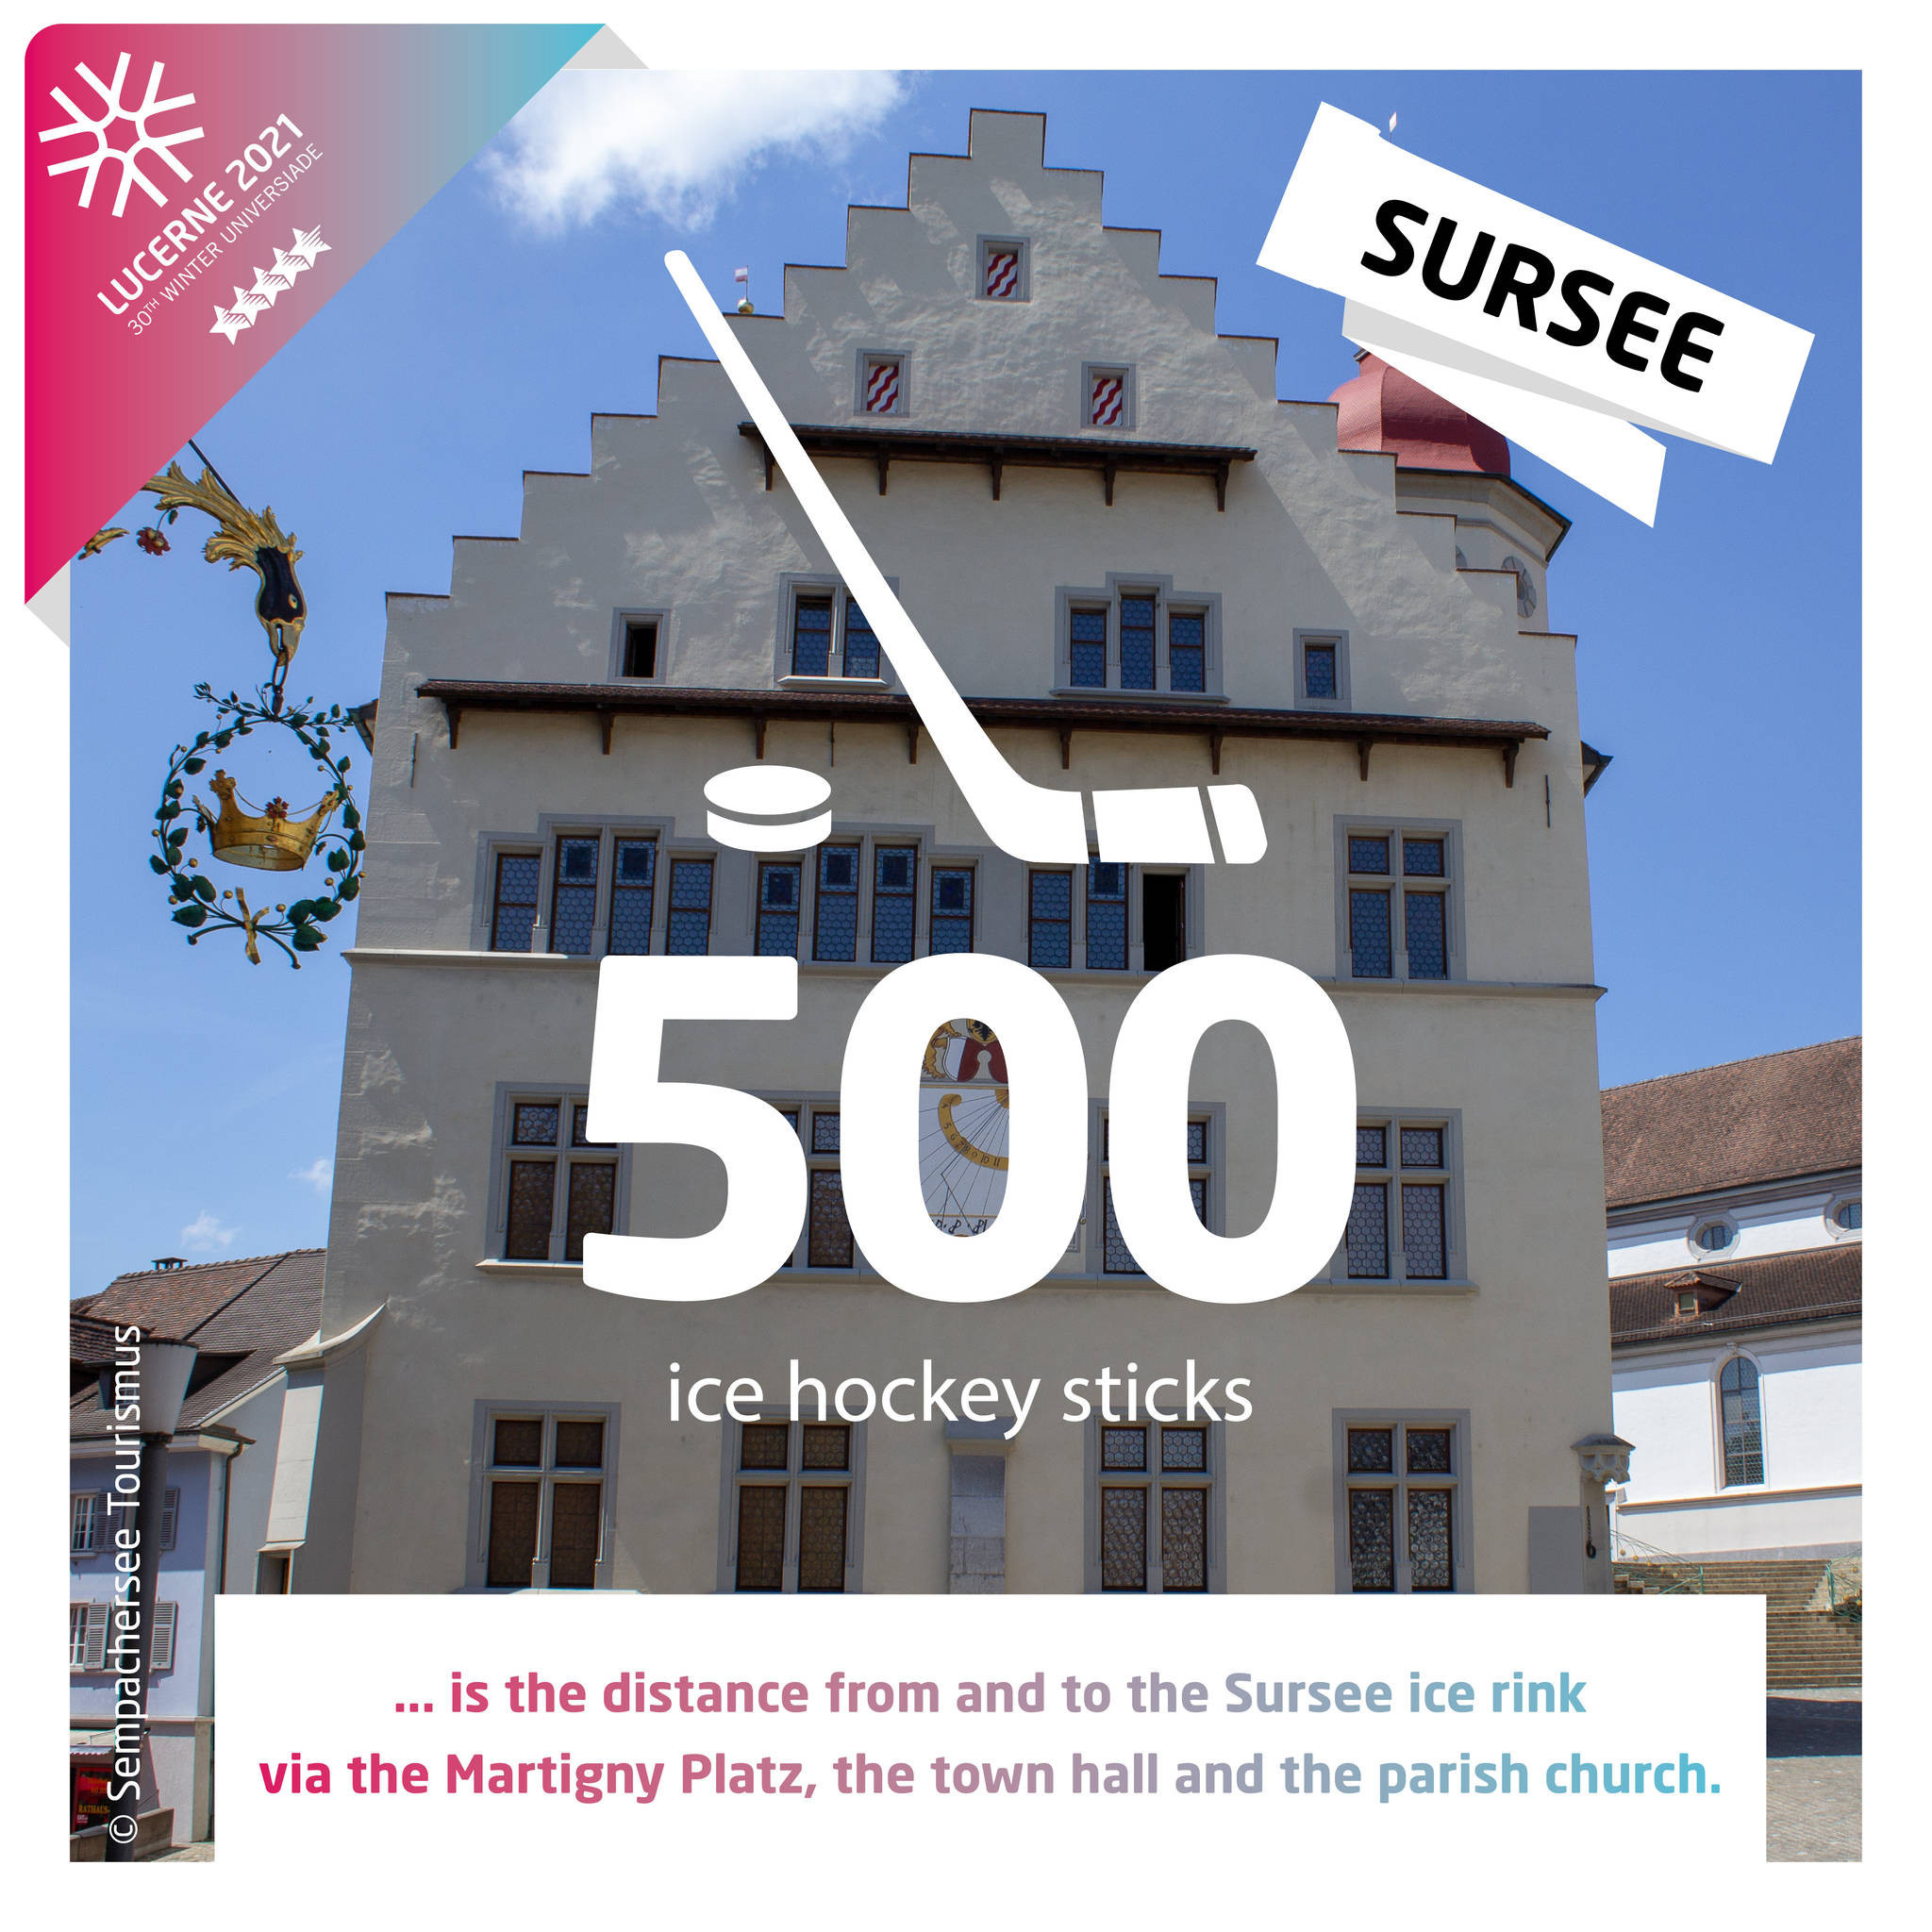 Lucerne 2021 has released various facts related to the number 500 ©Sempachersee Tourismus